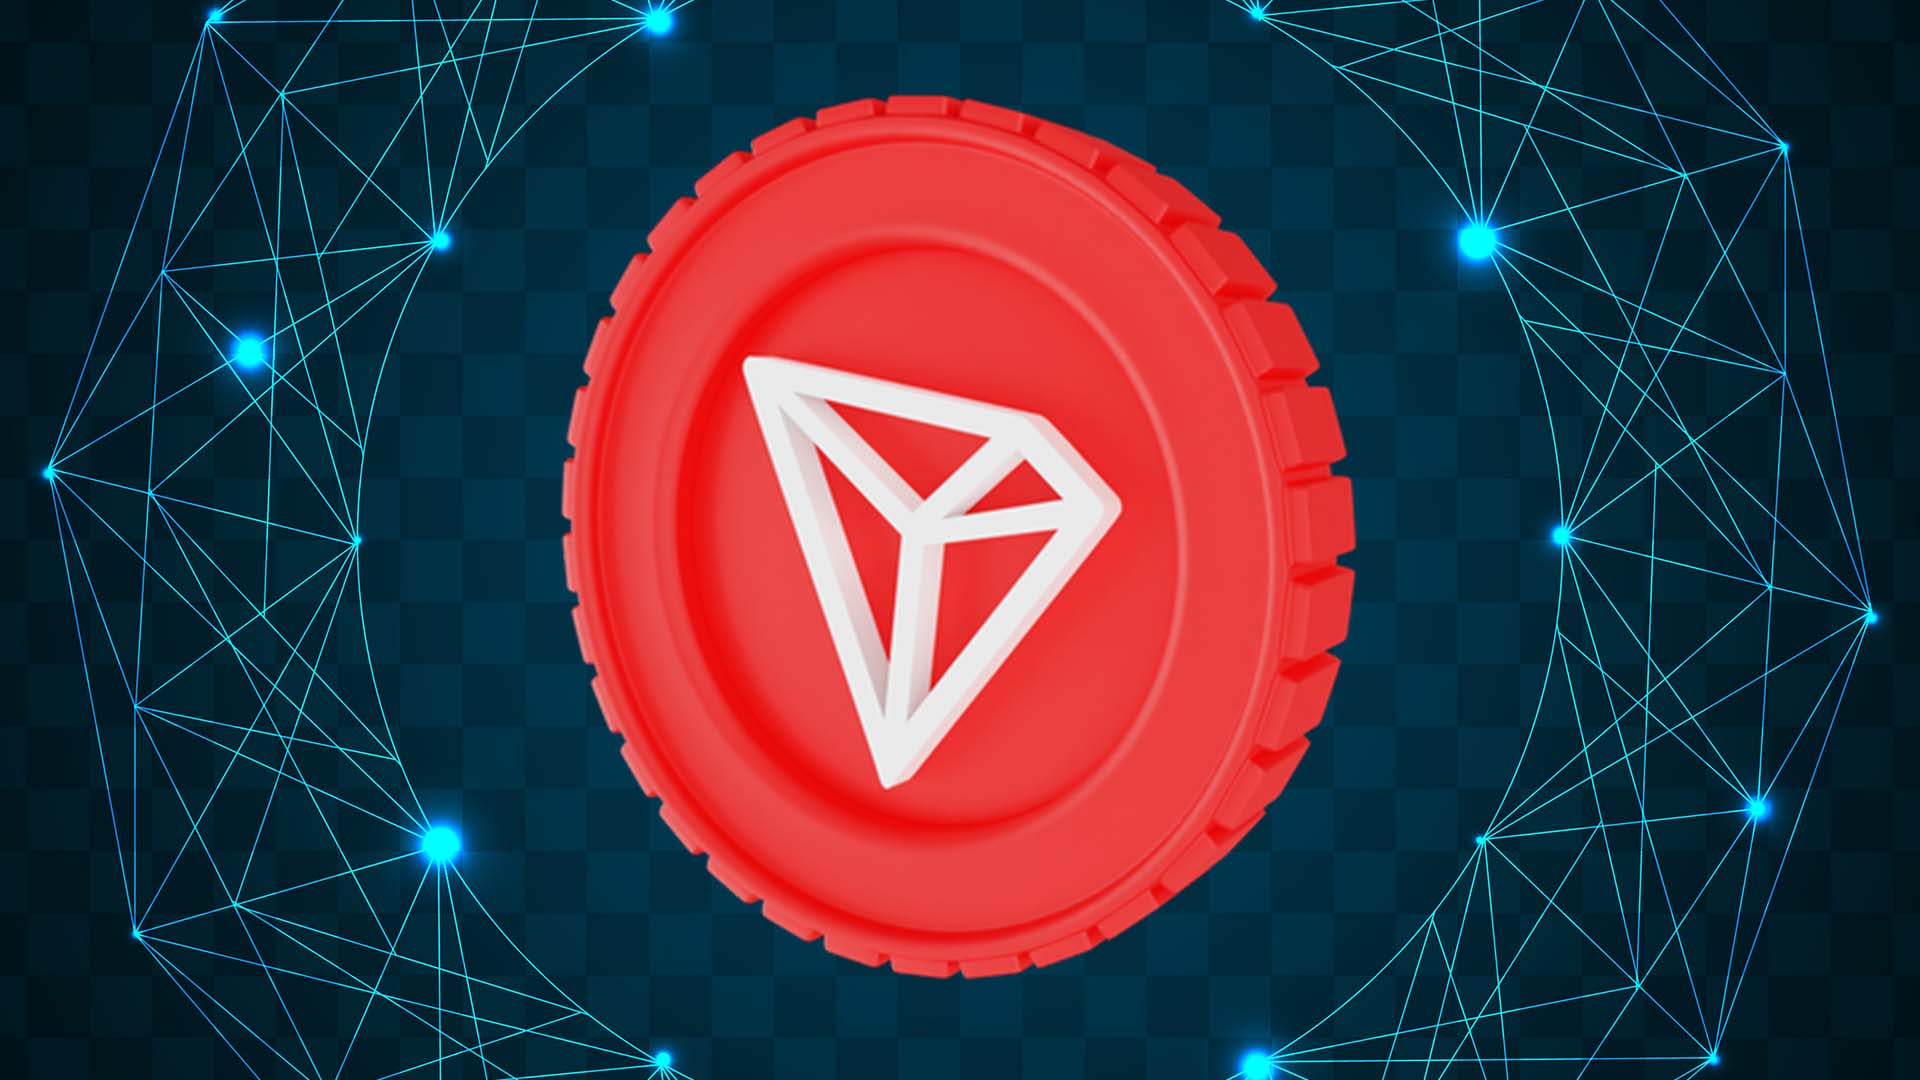 Tron (TRX) As a Payment Method in Online Casinos